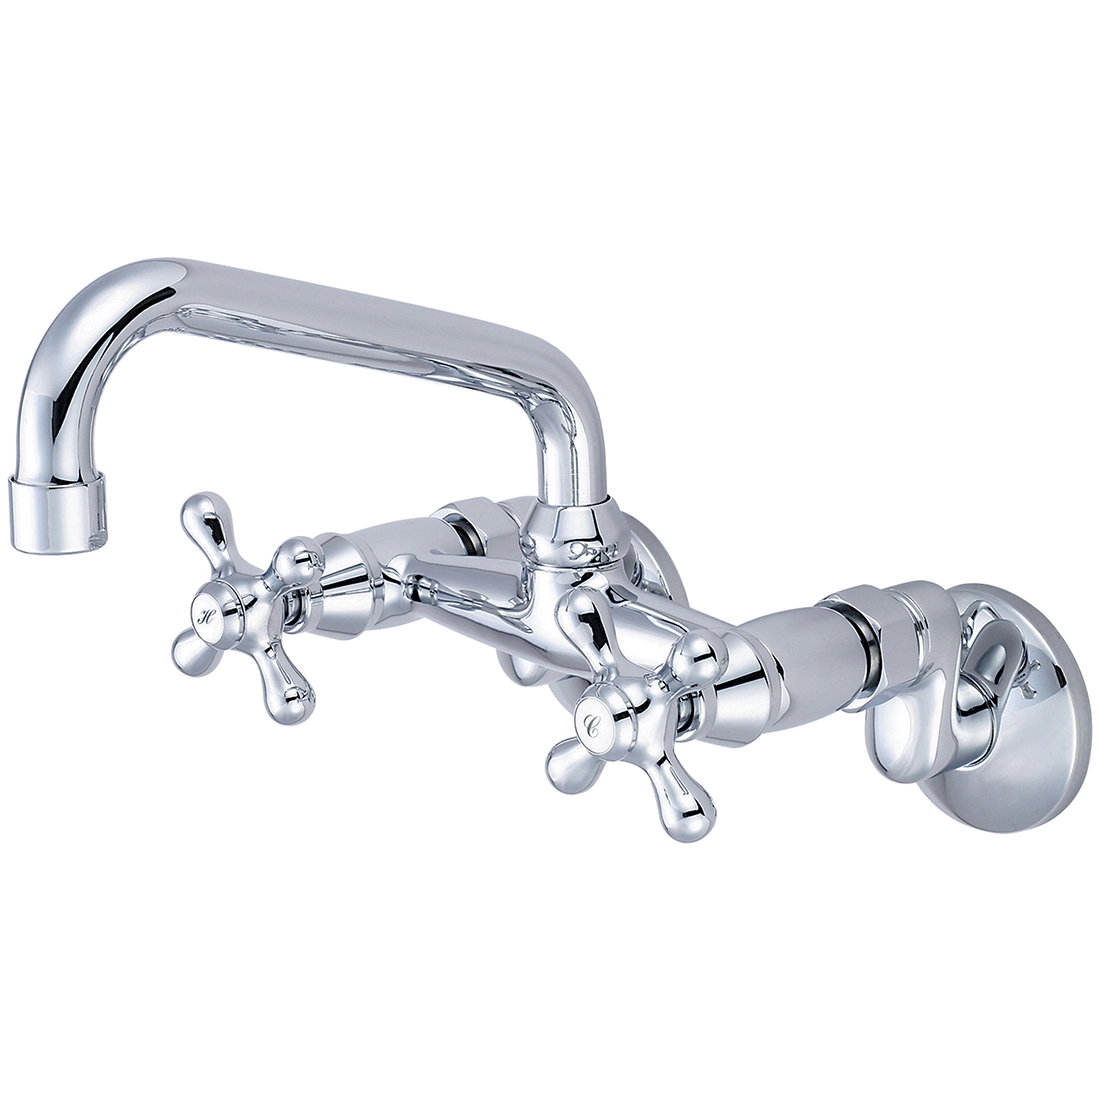 Pioneer Two Handle Wall Mount Faucet Model# 2PM540